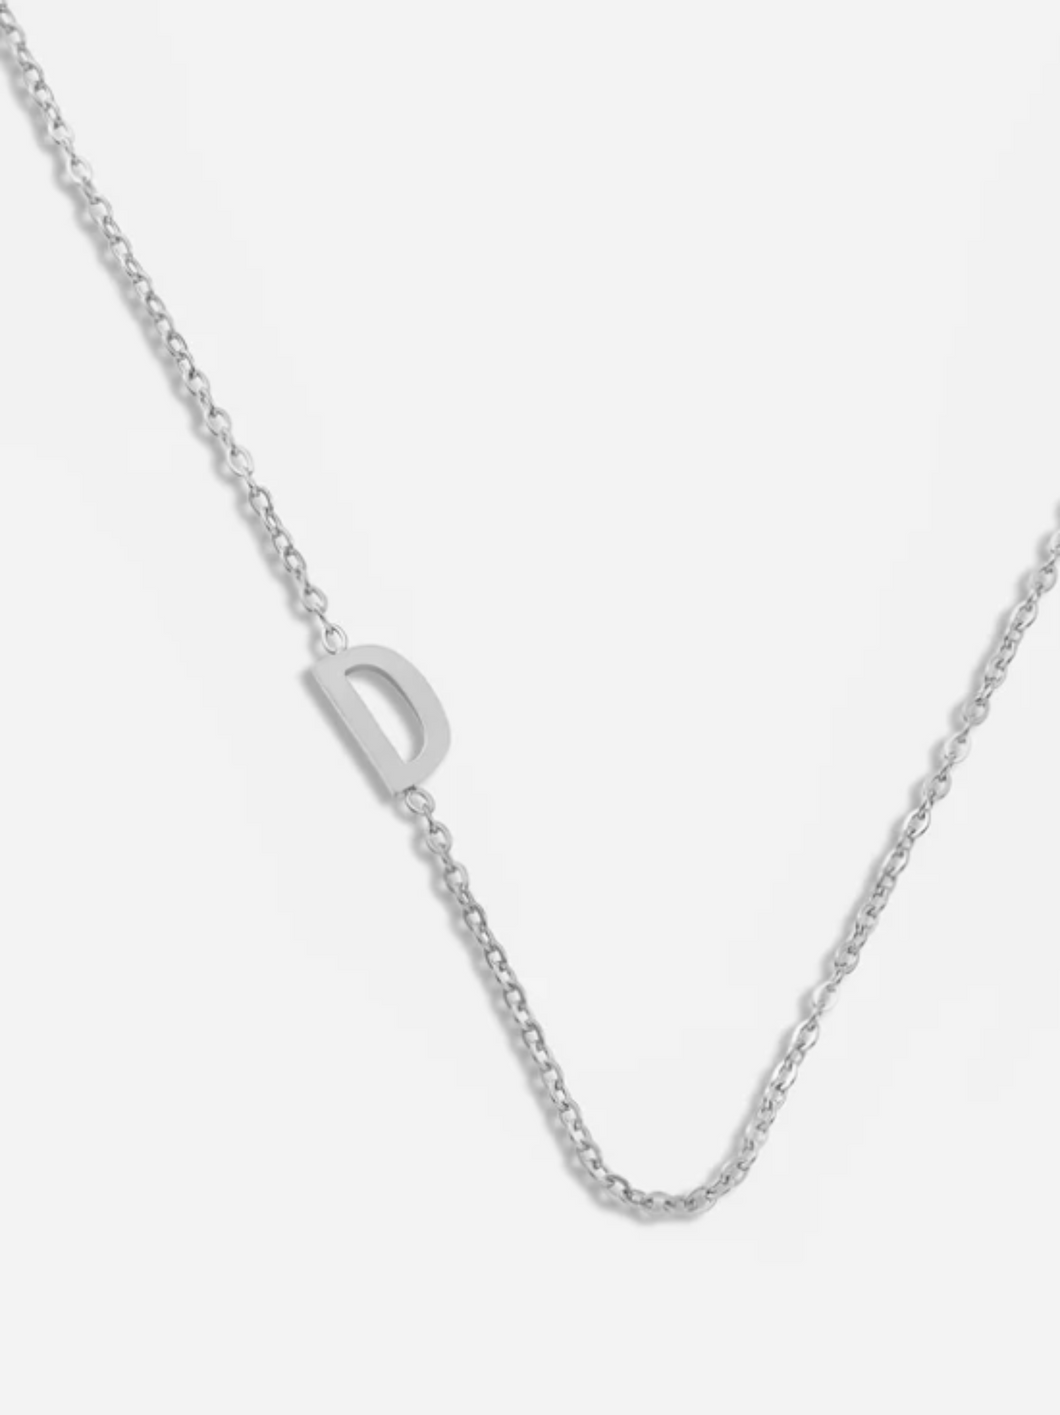 Side Letter Necklace: Silver Multi Letters